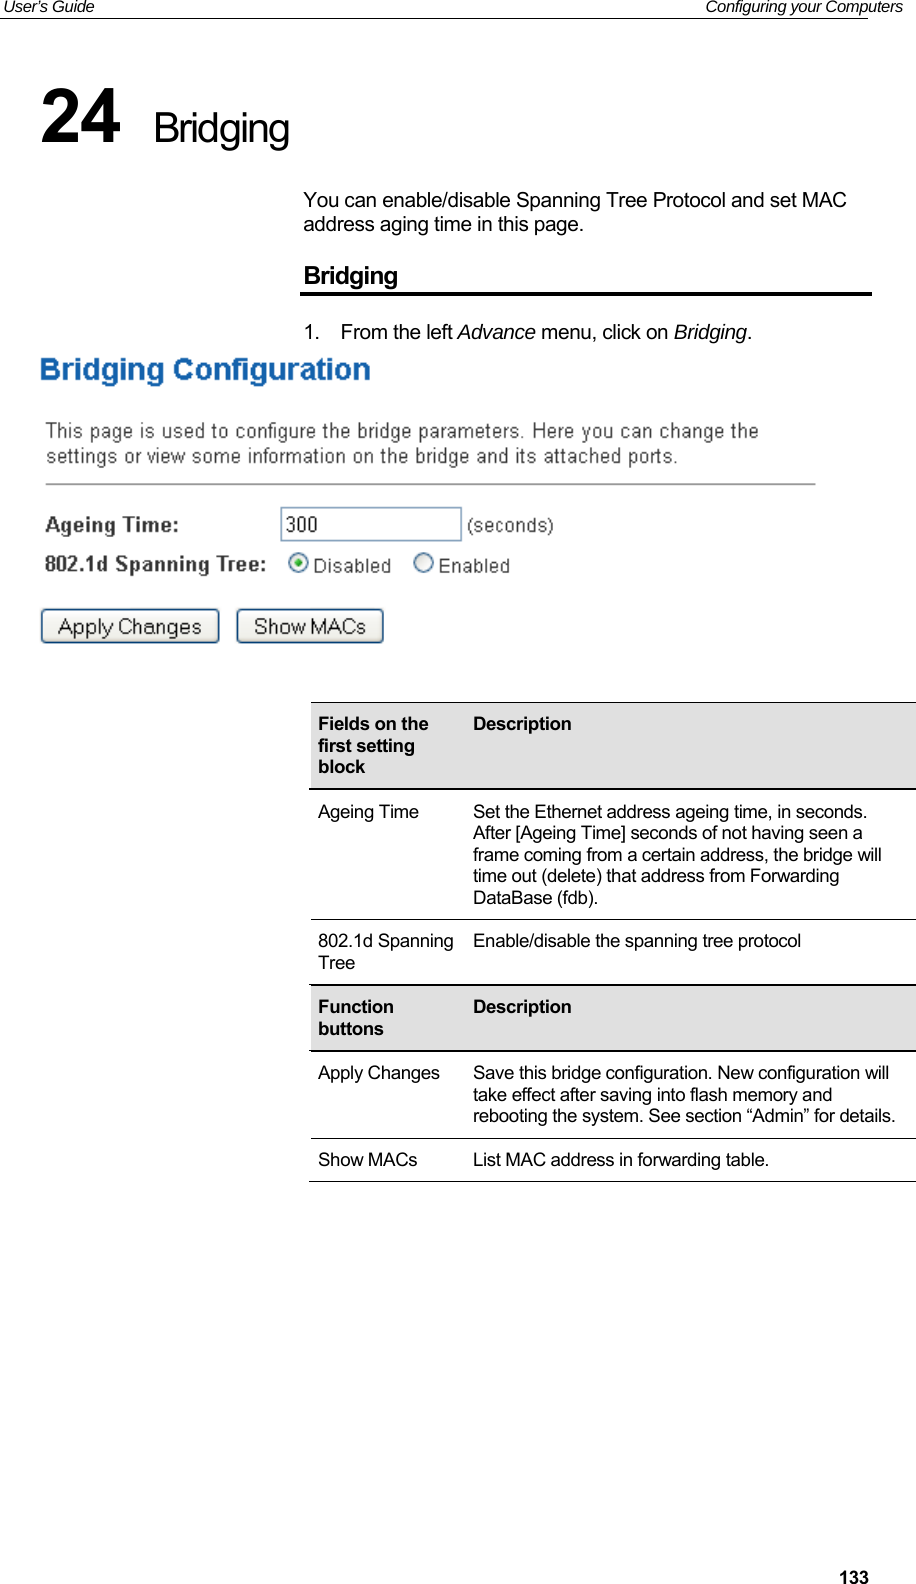 User’s Guide   Configuring your Computers  13324  Bridging You can enable/disable Spanning Tree Protocol and set MAC address aging time in this page. Bridging 1.  From the left Advance menu, click on Bridging.                          Fields on the first setting block Description Ageing Time  Set the Ethernet address ageing time, in seconds. After [Ageing Time] seconds of not having seen a frame coming from a certain address, the bridge will time out (delete) that address from Forwarding DataBase (fdb). 802.1d Spanning Tree Enable/disable the spanning tree protocol Function buttons Description Apply Changes  Save this bridge configuration. New configuration will take effect after saving into flash memory and rebooting the system. See section “Admin” for details. Show MACs  List MAC address in forwarding table. 